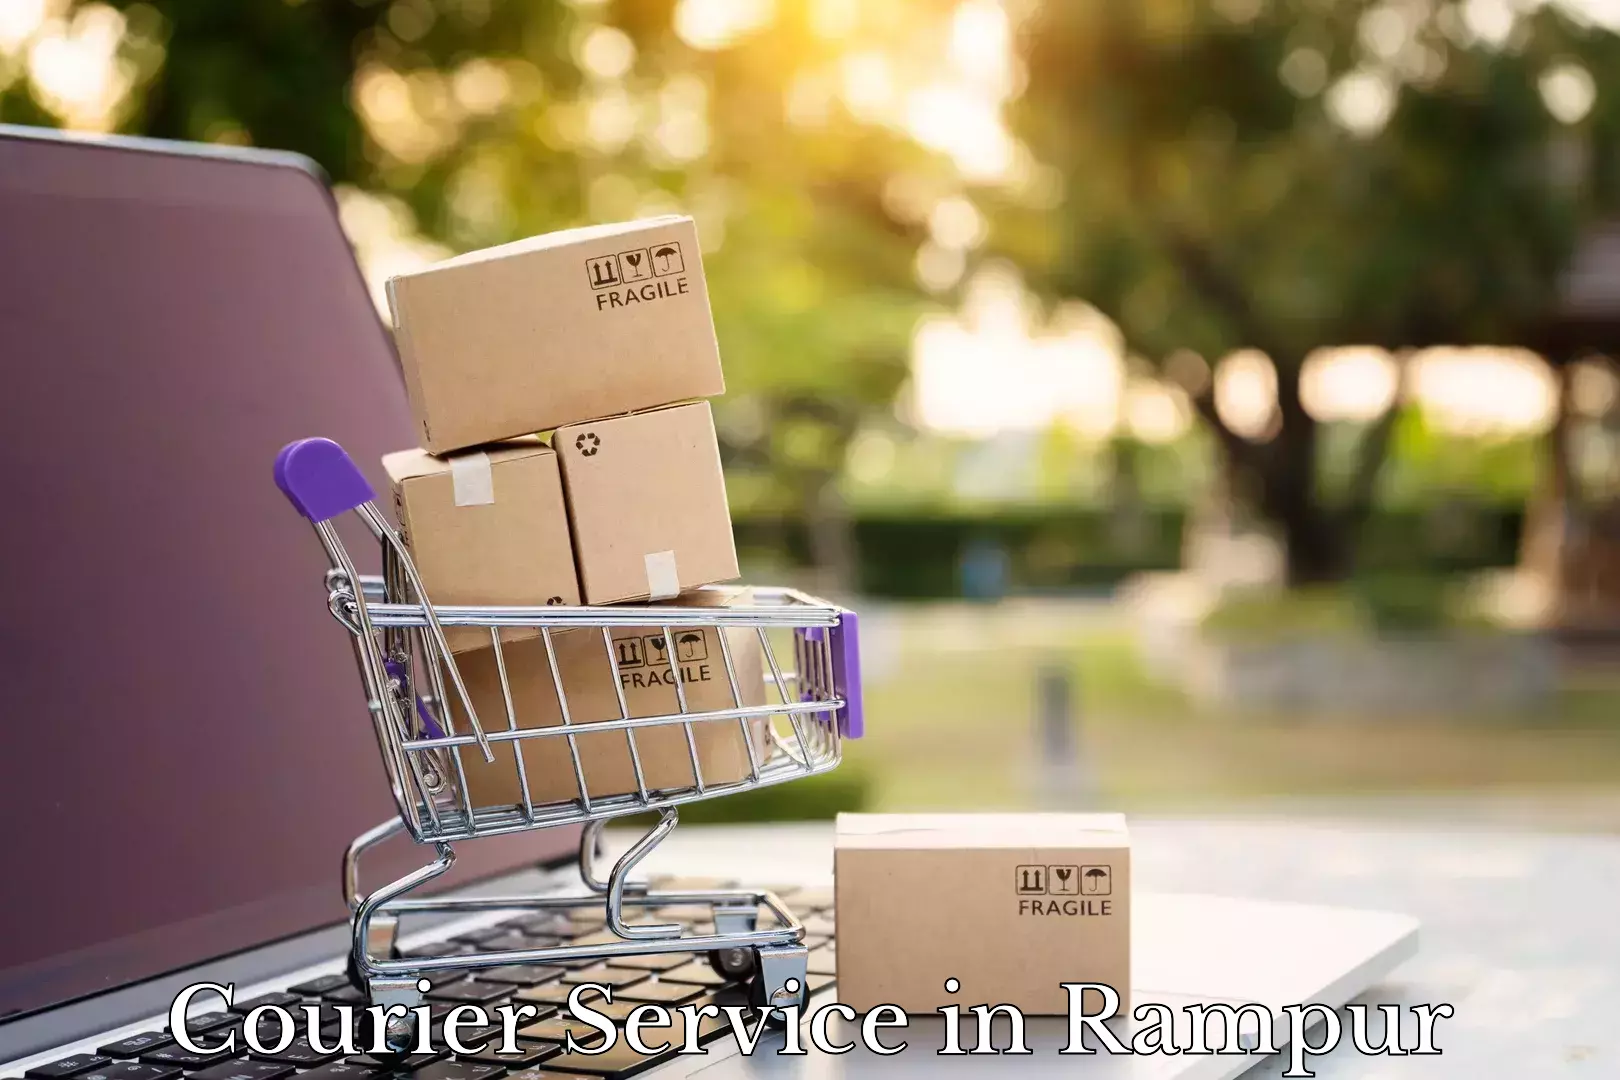 Courier service innovation in Rampur